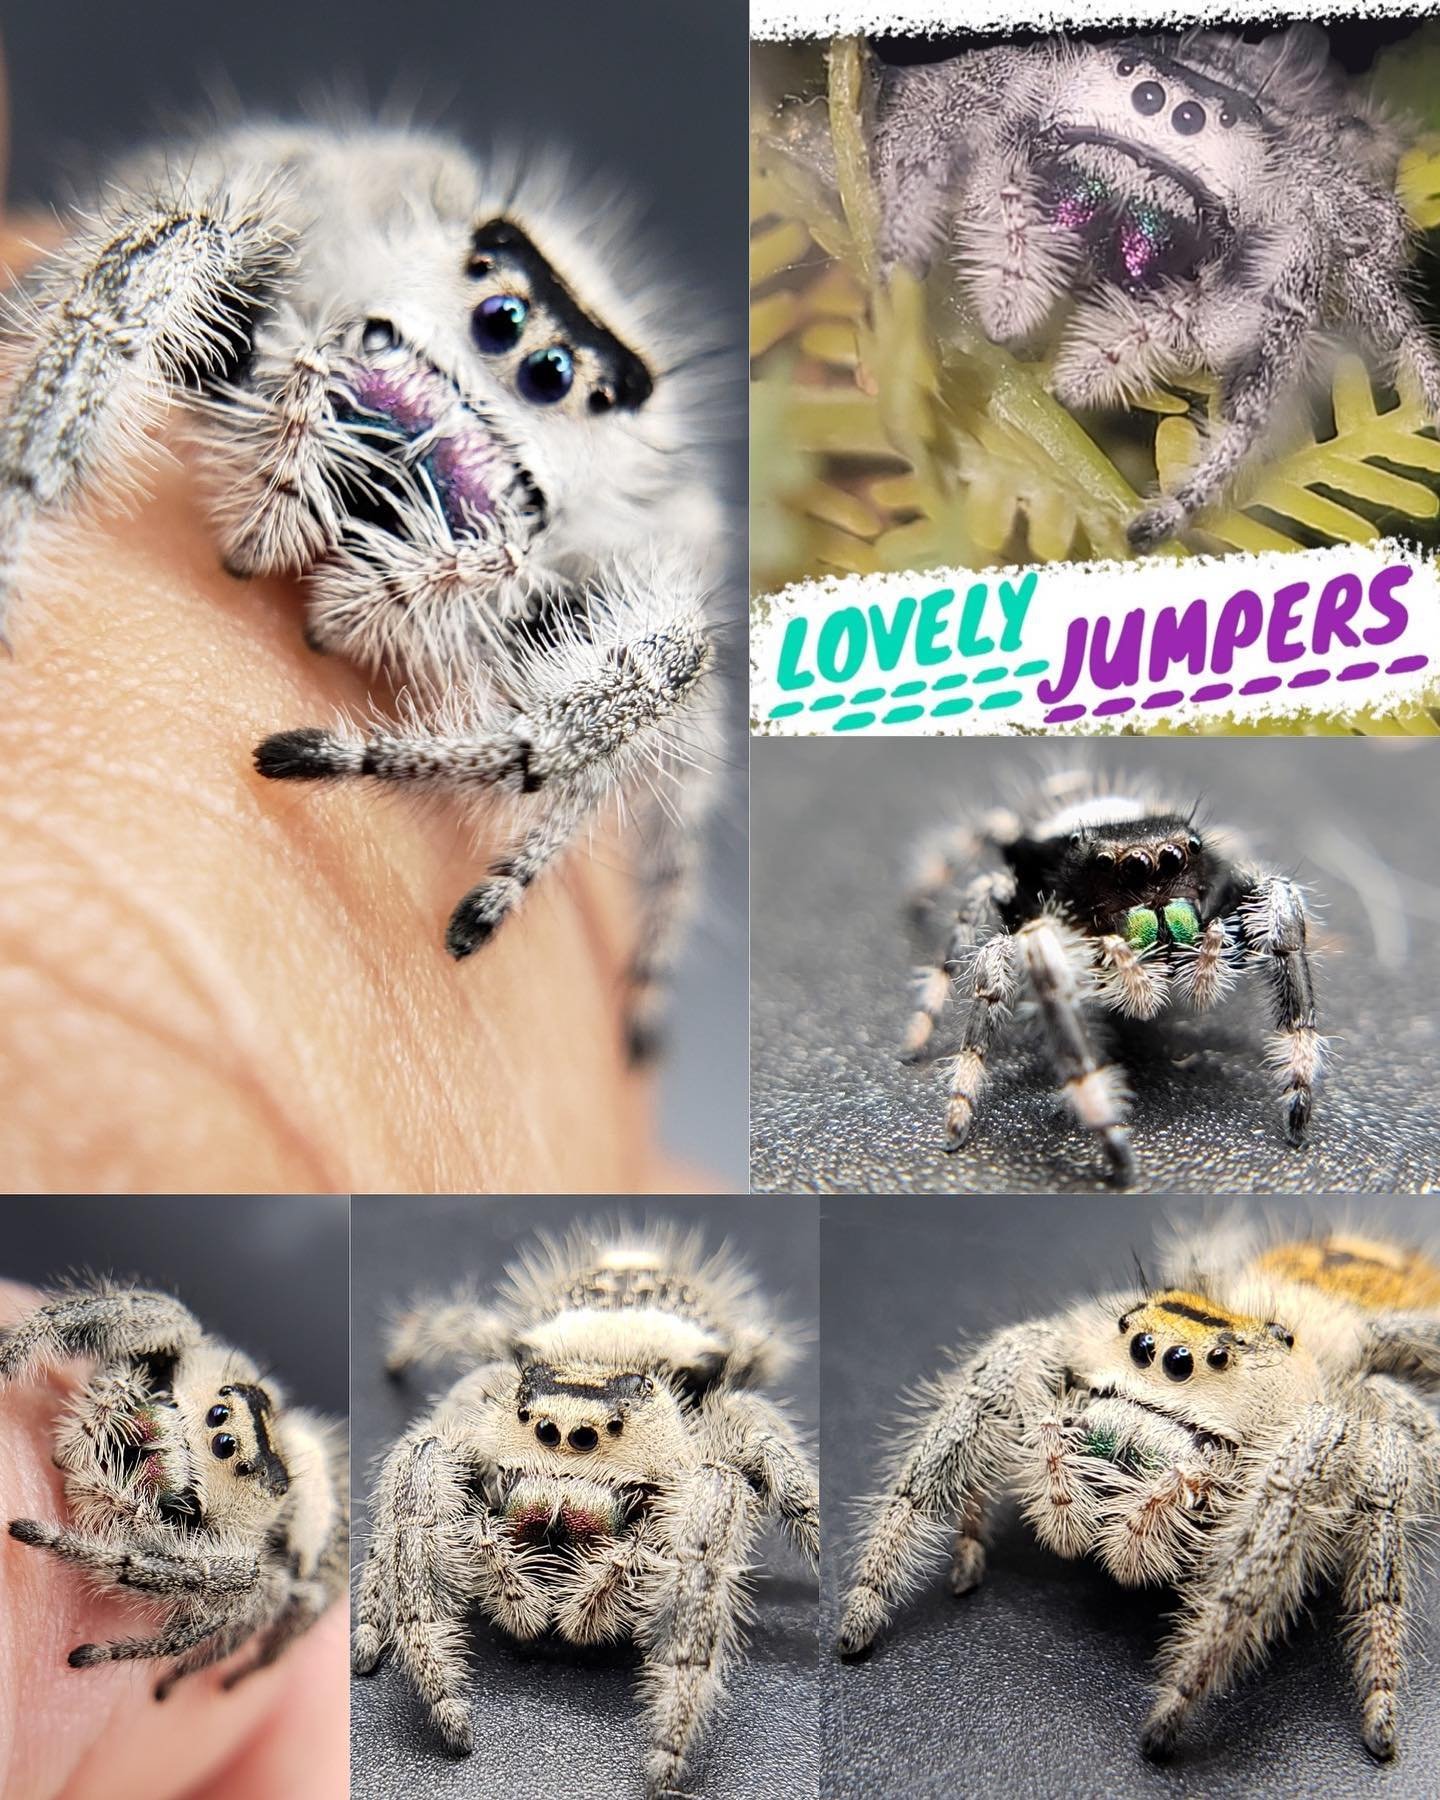 Lovely Jumpers will be joining us June 2nd! 

Lovely Jumpers&rsquo; dedication shines though in the health and vibrancy of their captive bred jumping spiders.
This passionate husband and wife team pourscare into cultivating an array of personable spe